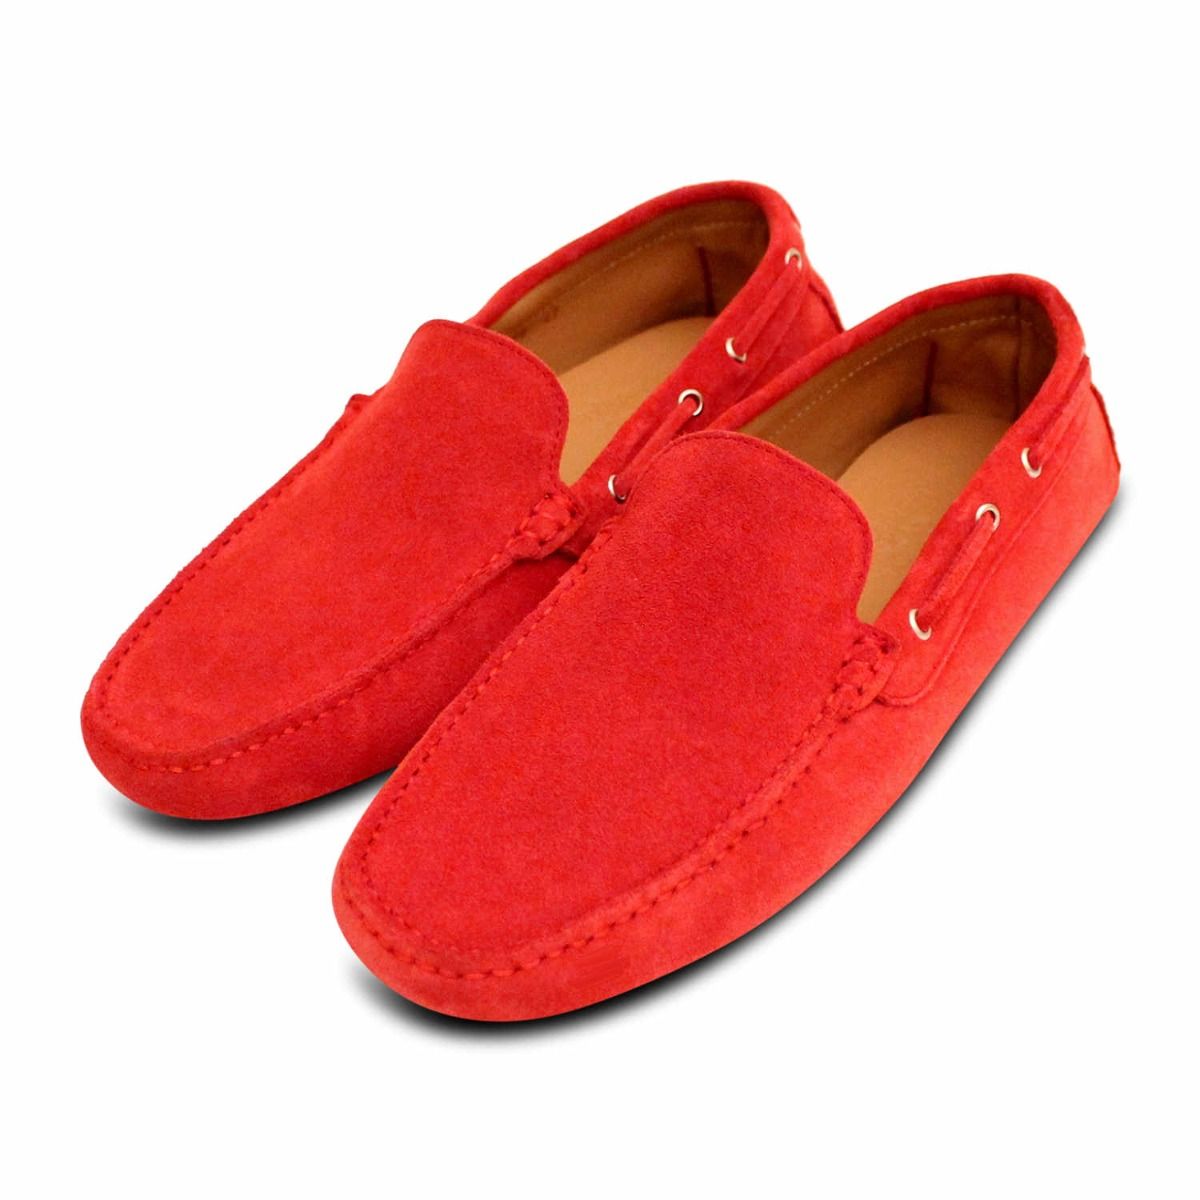 Red patent leather driving shoes mens moccasin – Vercini